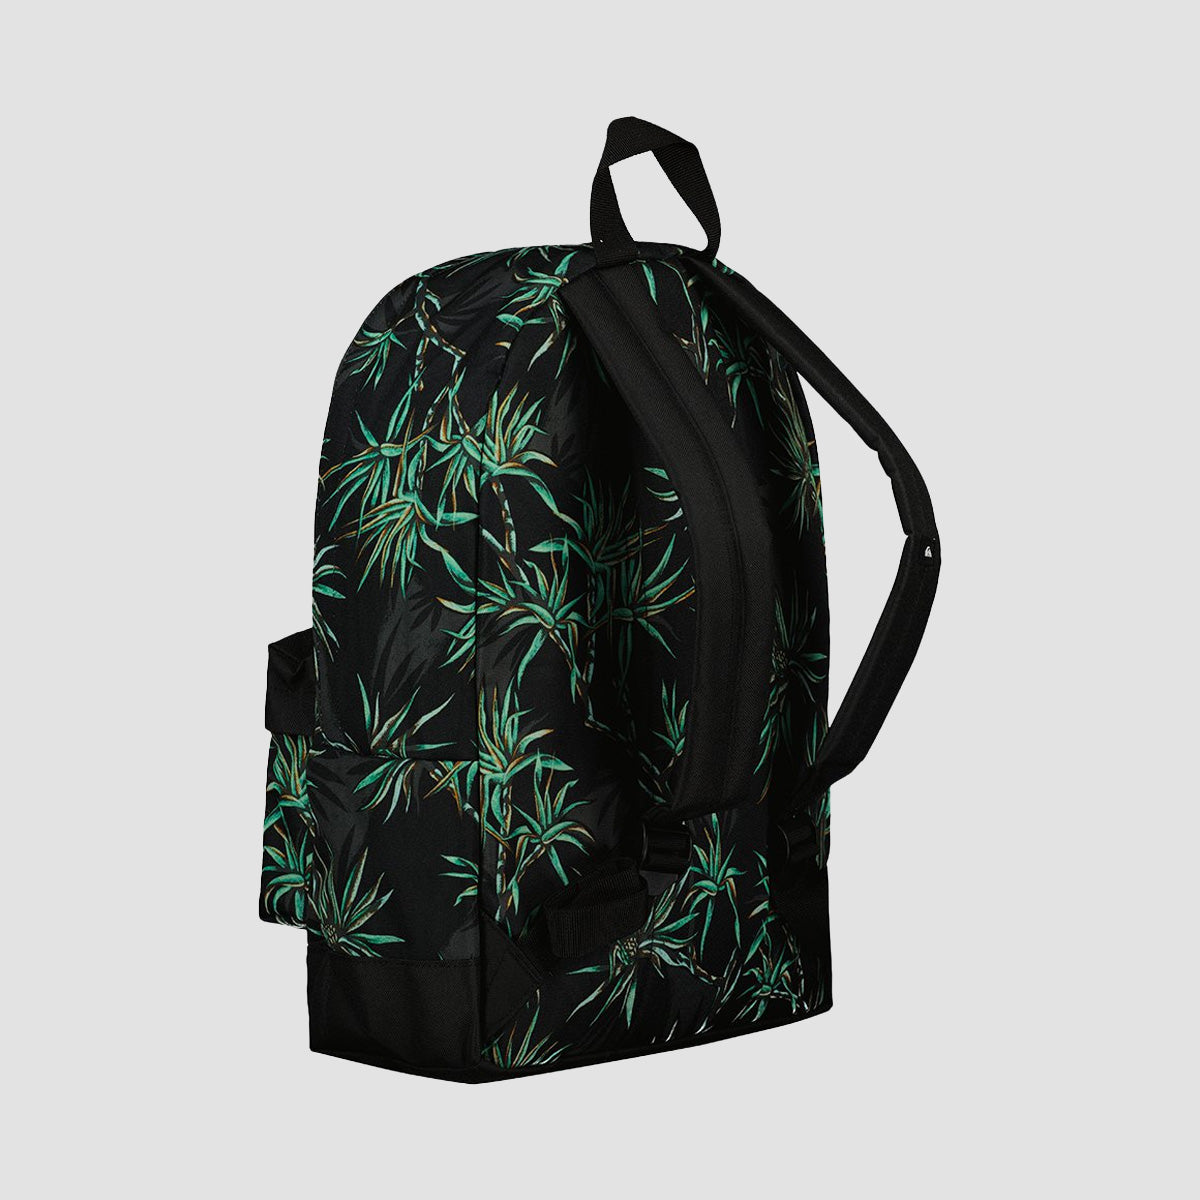 Quiksilver Salty Palm New Backpack Black